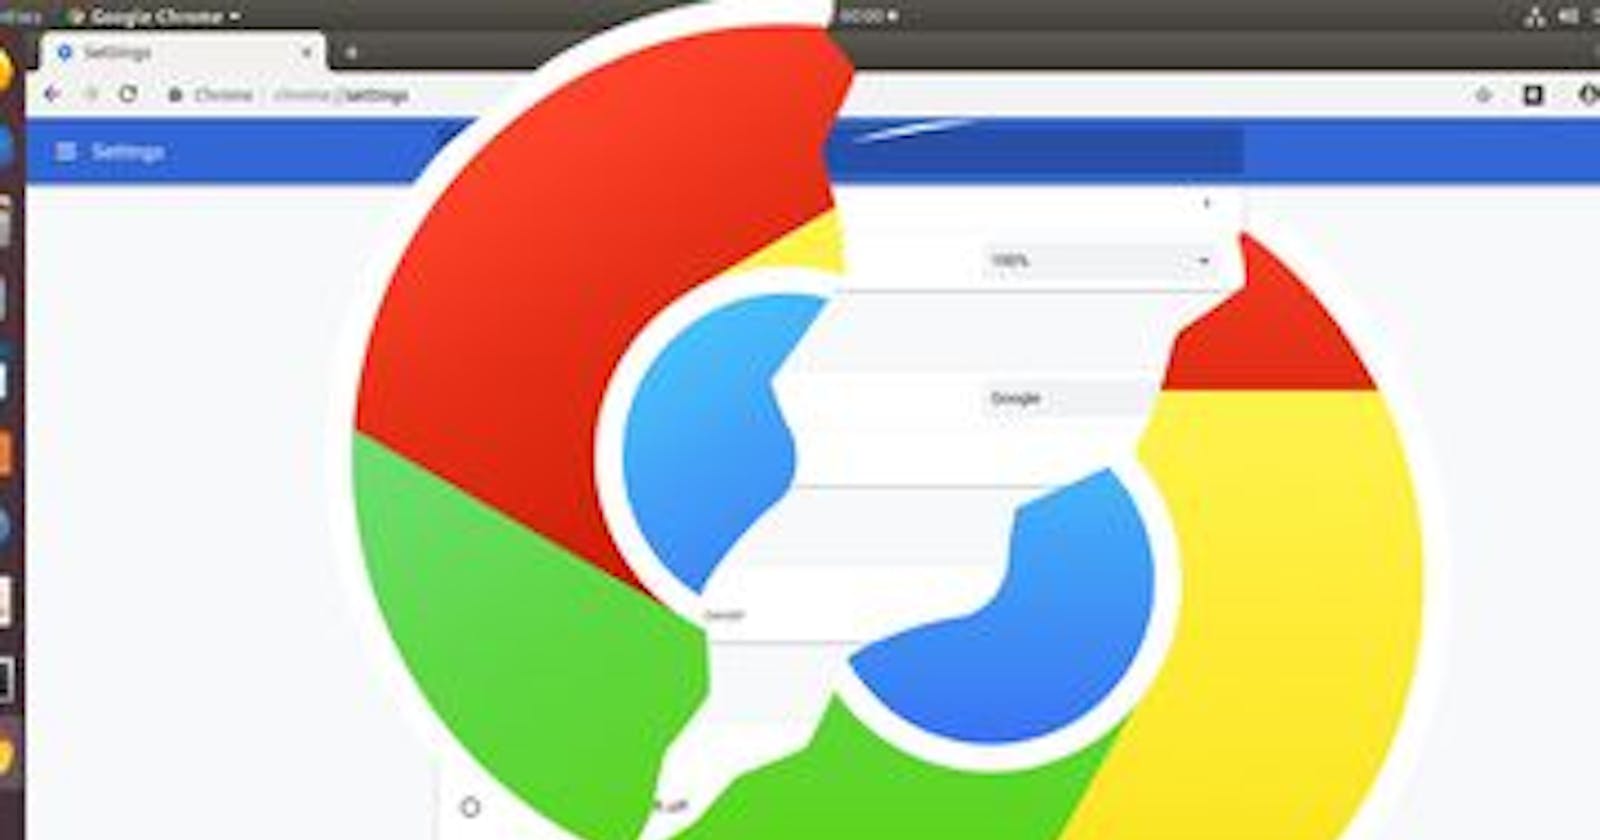 How to fix slow loading issues in Google Chrome